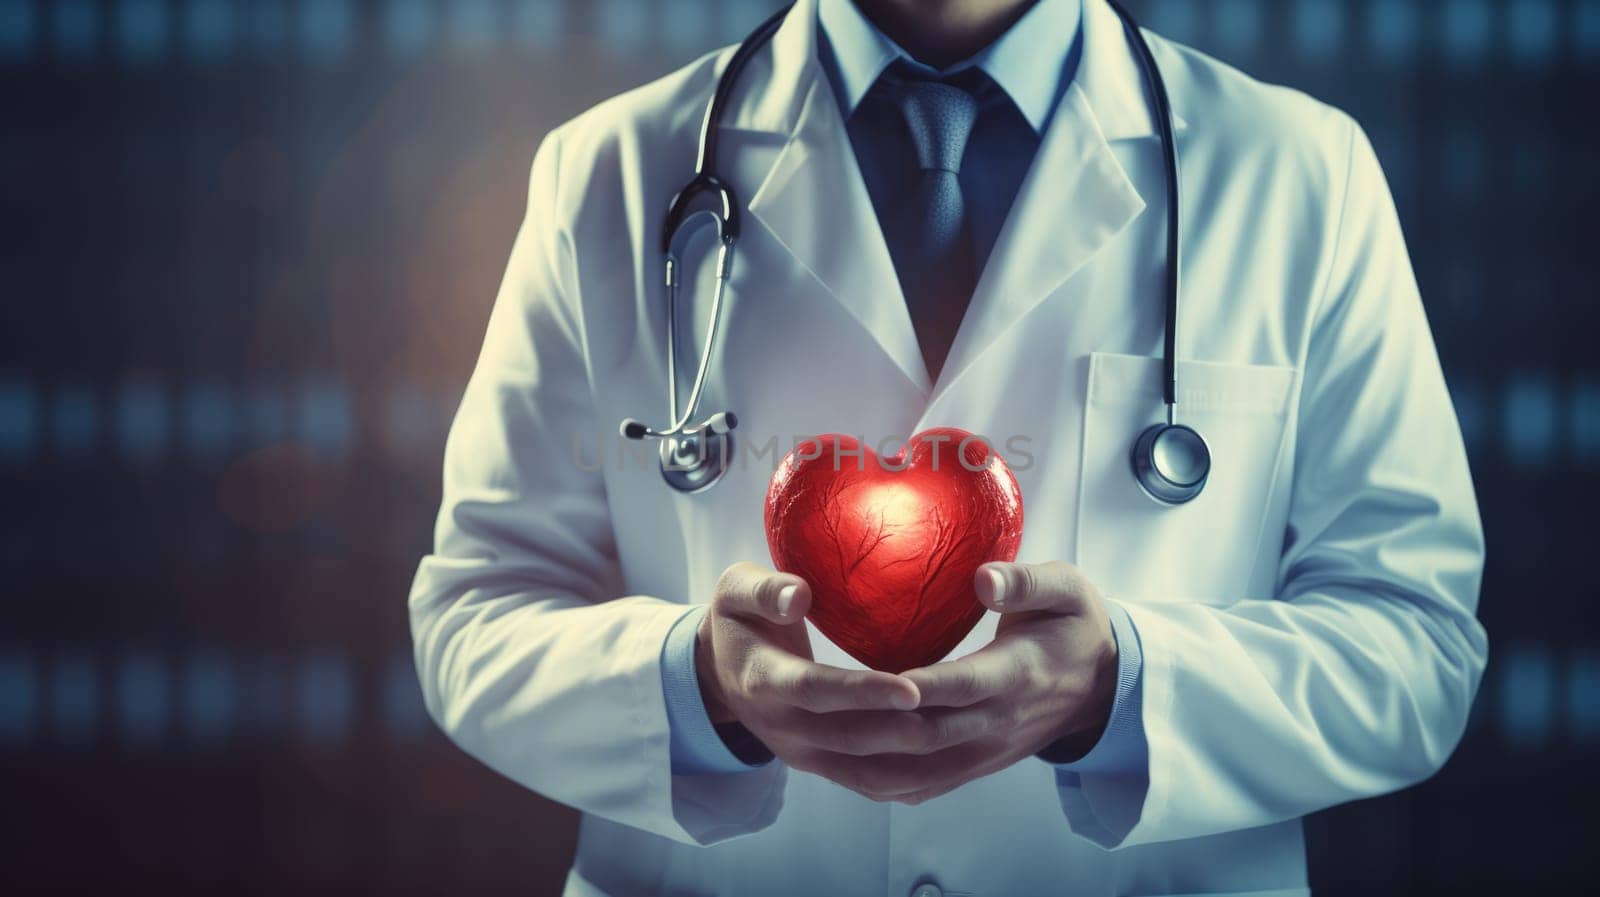 Doctor is holding red heart in his hands. St Valentine's Day vibe. Heart surgery, Cardiac surgery